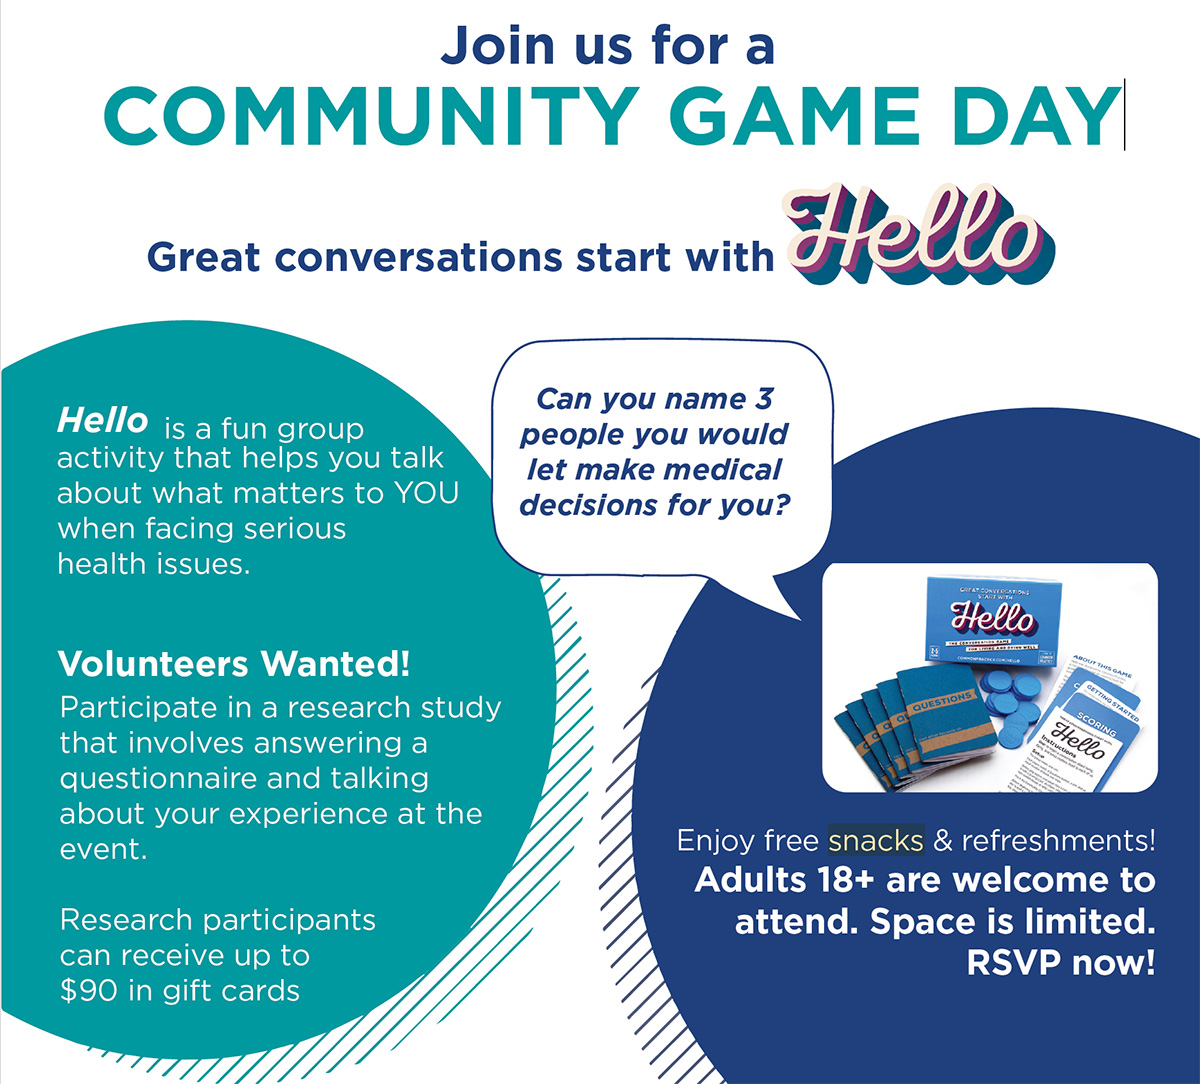 Join us for a community game day event